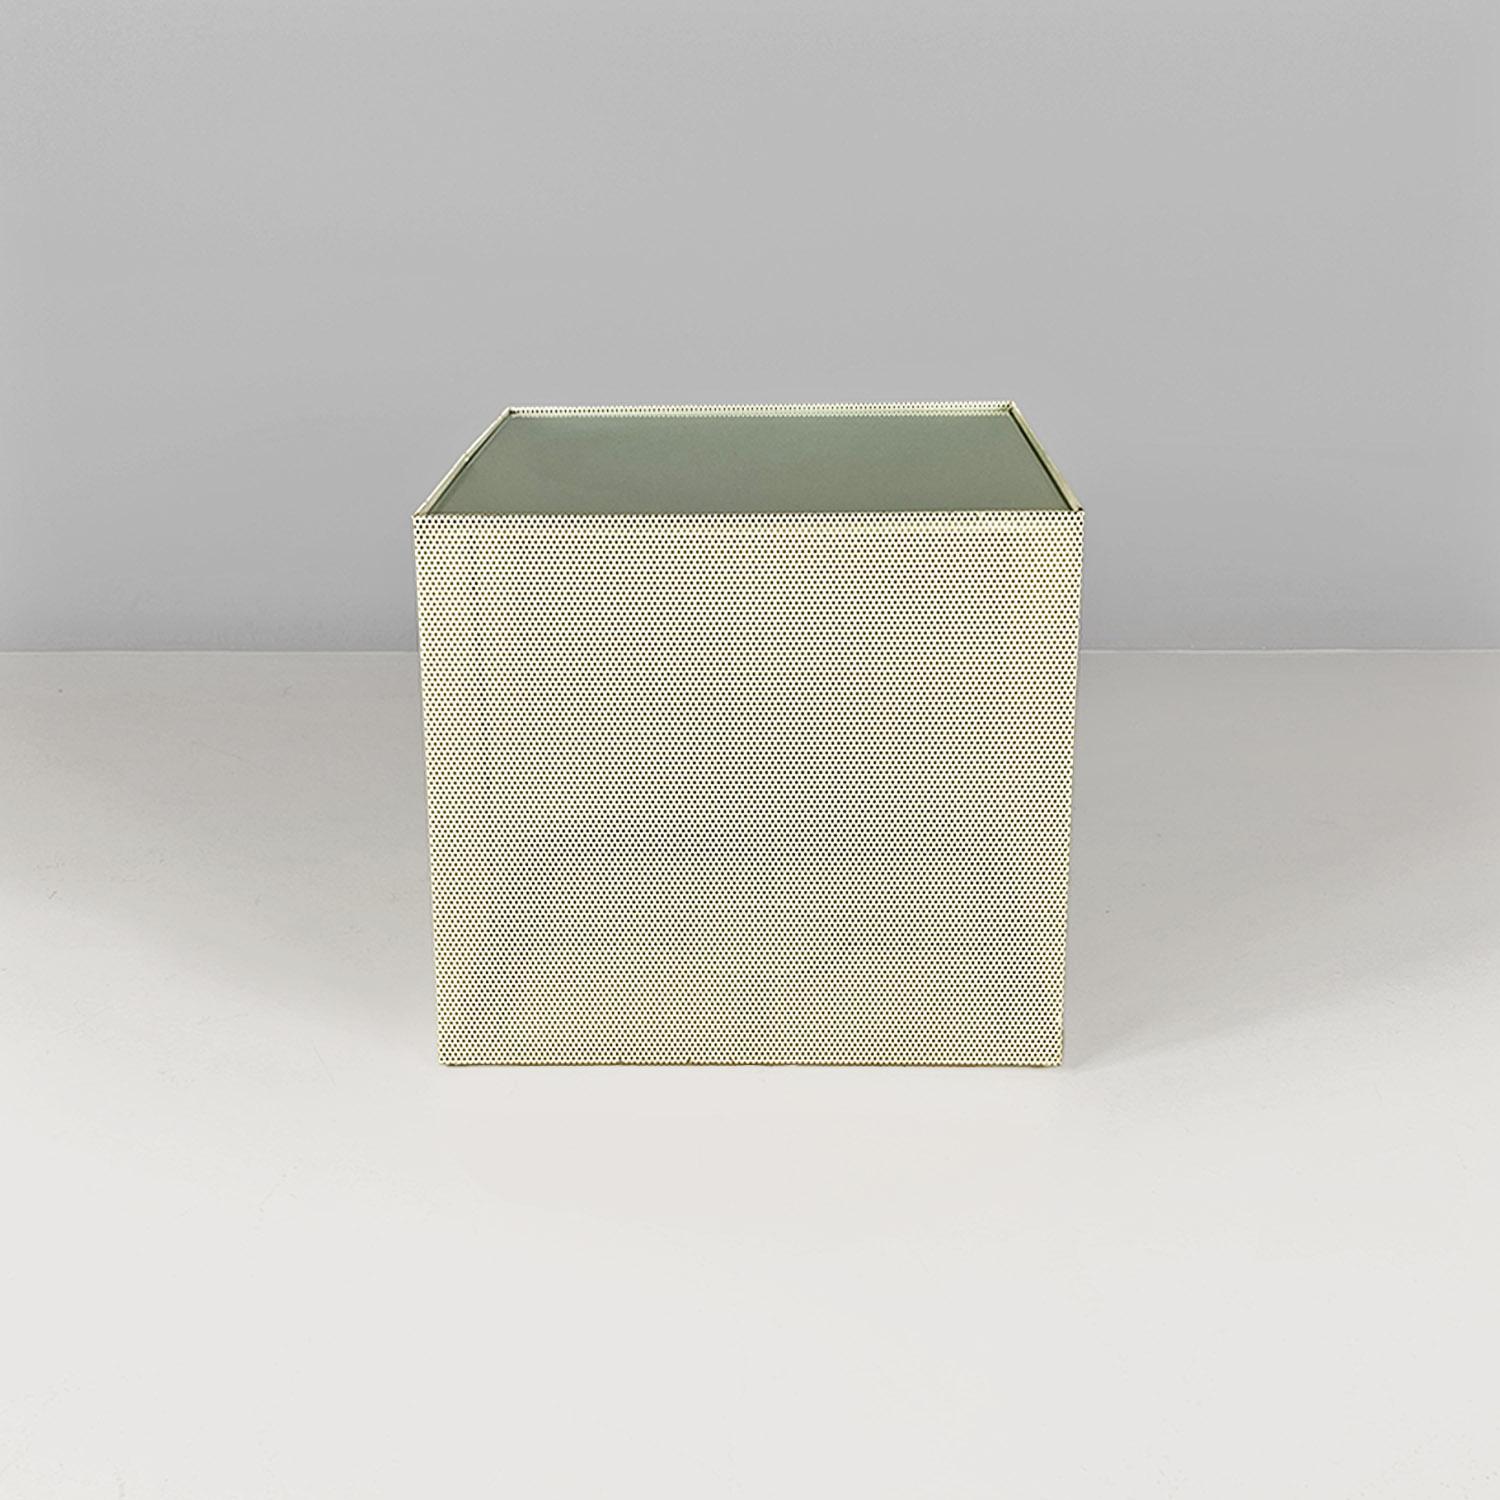 An almost cubic-shaped coffee table made of white microperforated metal, with a glass top with a matte finish.
1980 ca.
Good conditions.
Measurements in cm 49x49x45h
Small table or tabletop, almost cubic in shape, only a few inches separating it